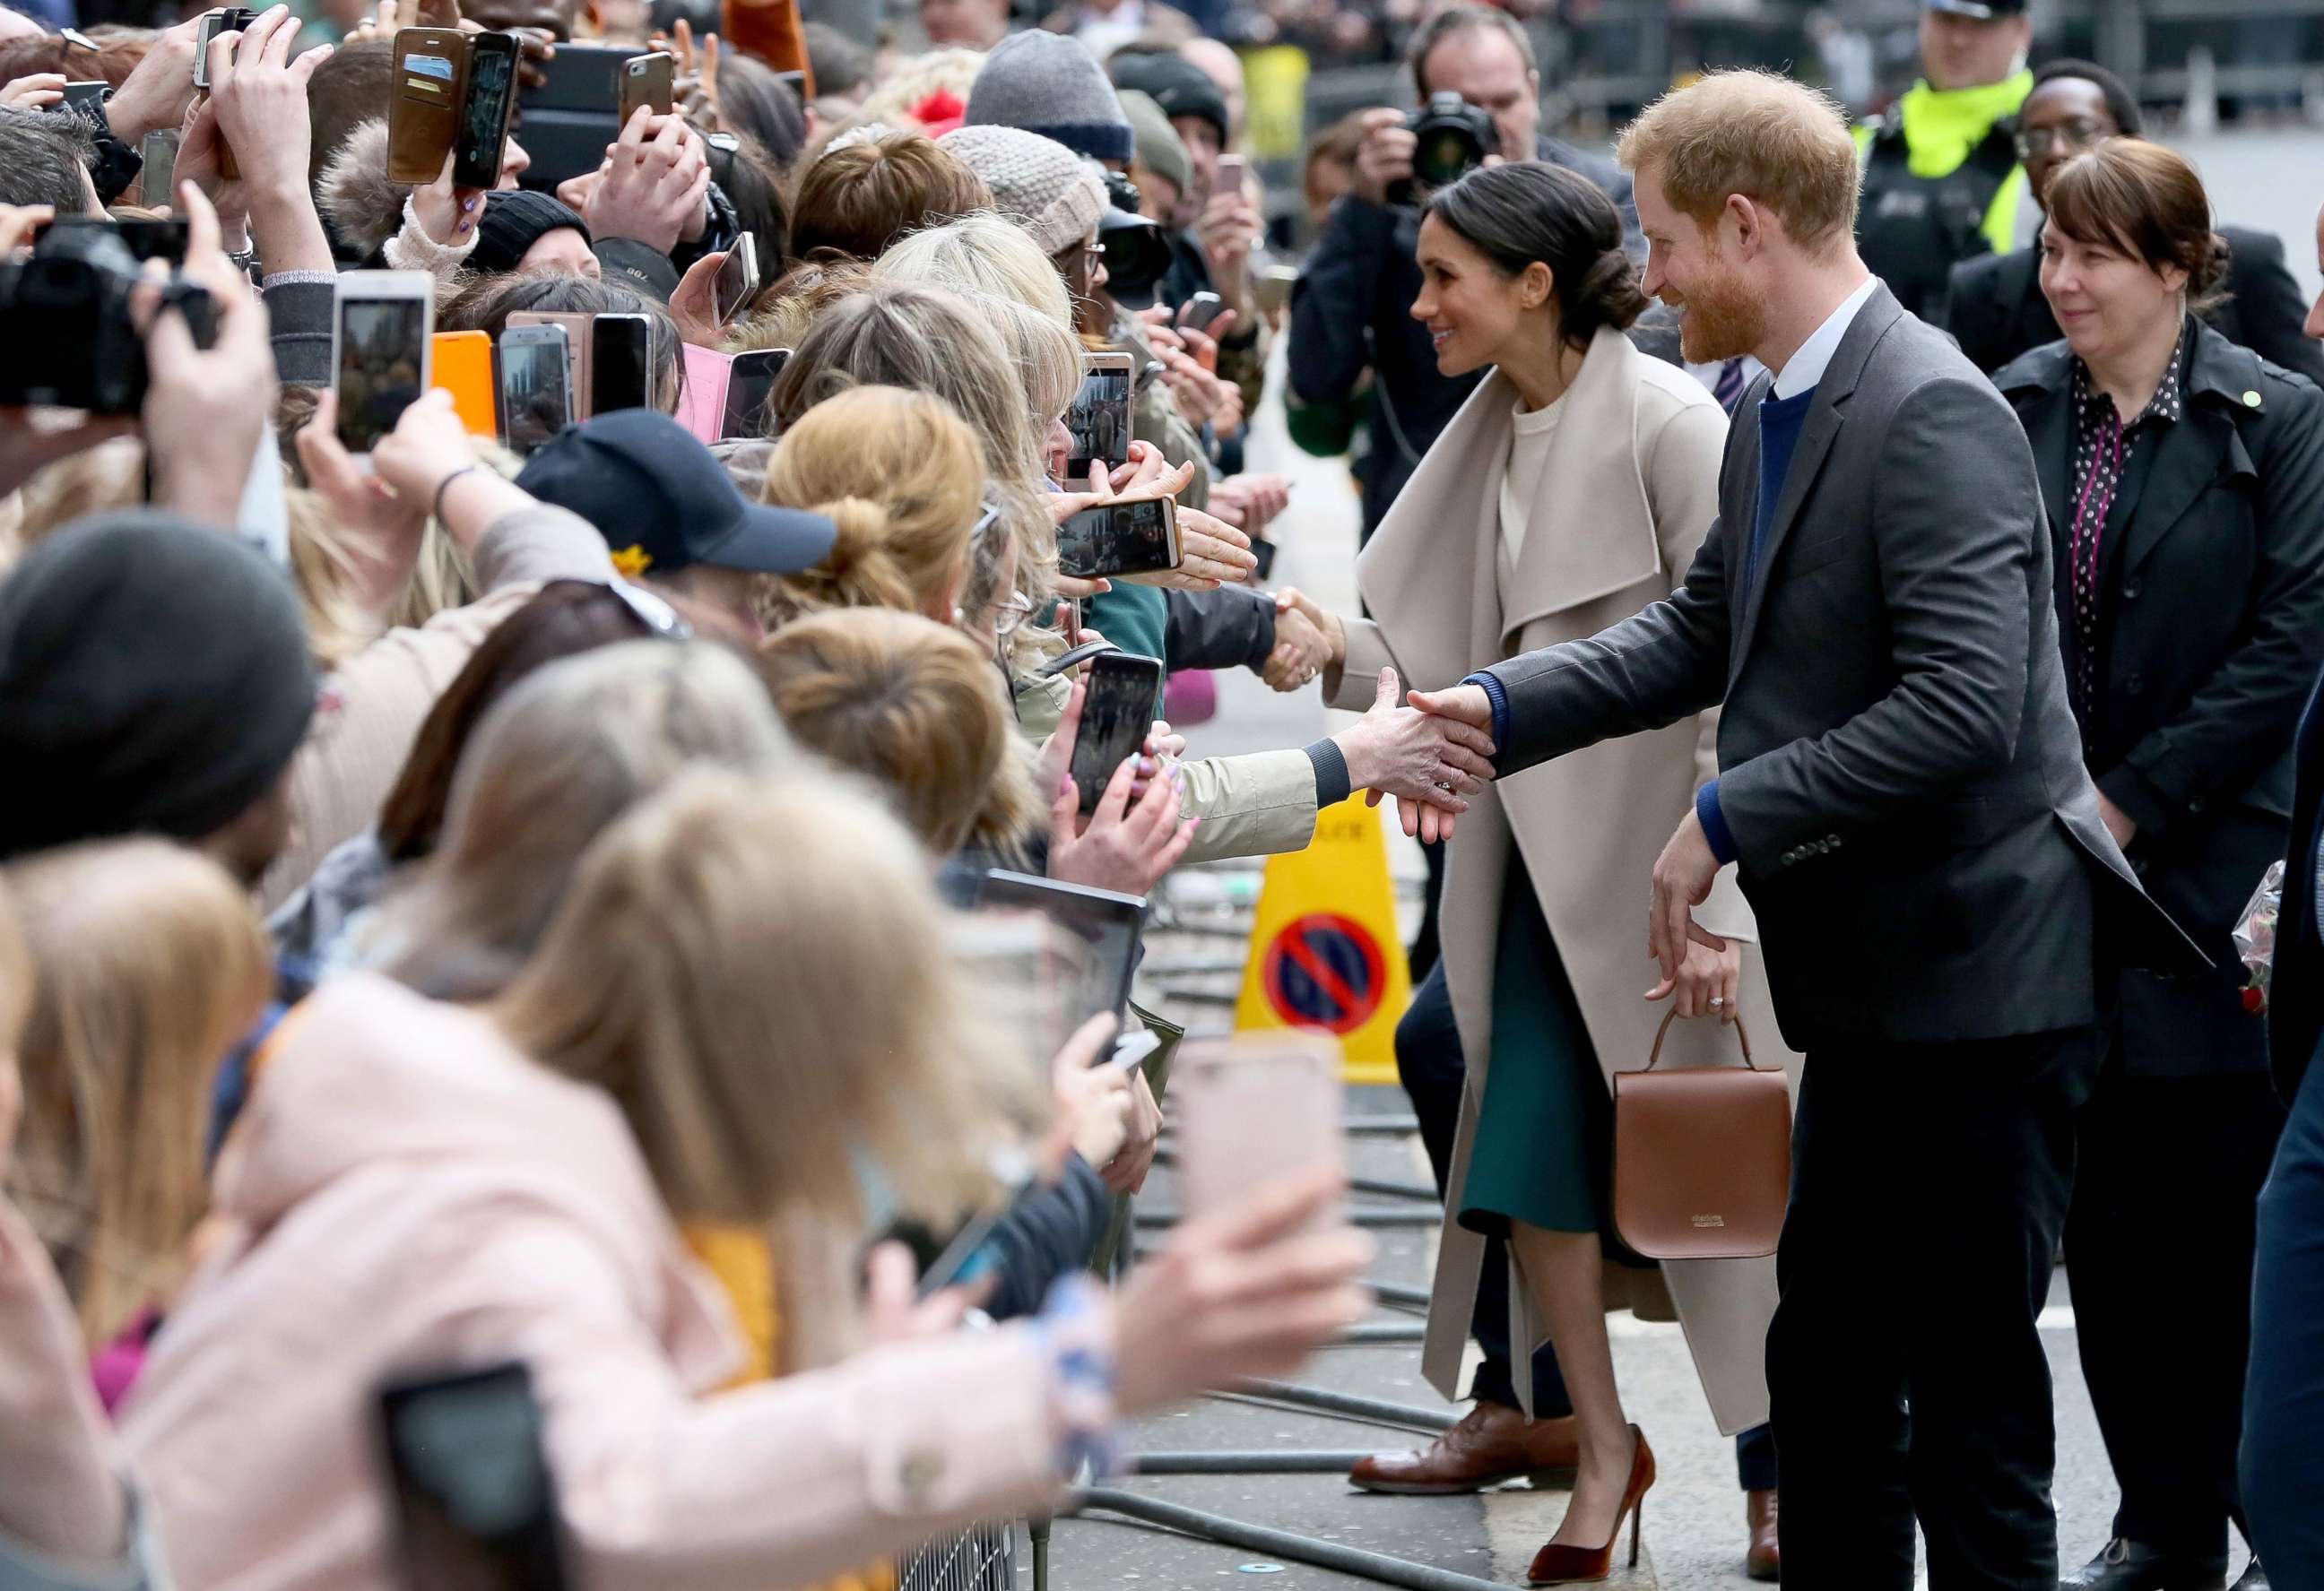 PHOTO: Britain's Prince Harry and his fiancee, Meghan Markle, greet well-wishers after a visit at the historic building, The Crown Liquor Saloon in Belfast, March 23, 2018, where they will learn of the pub's heritage from members of the National Trust.